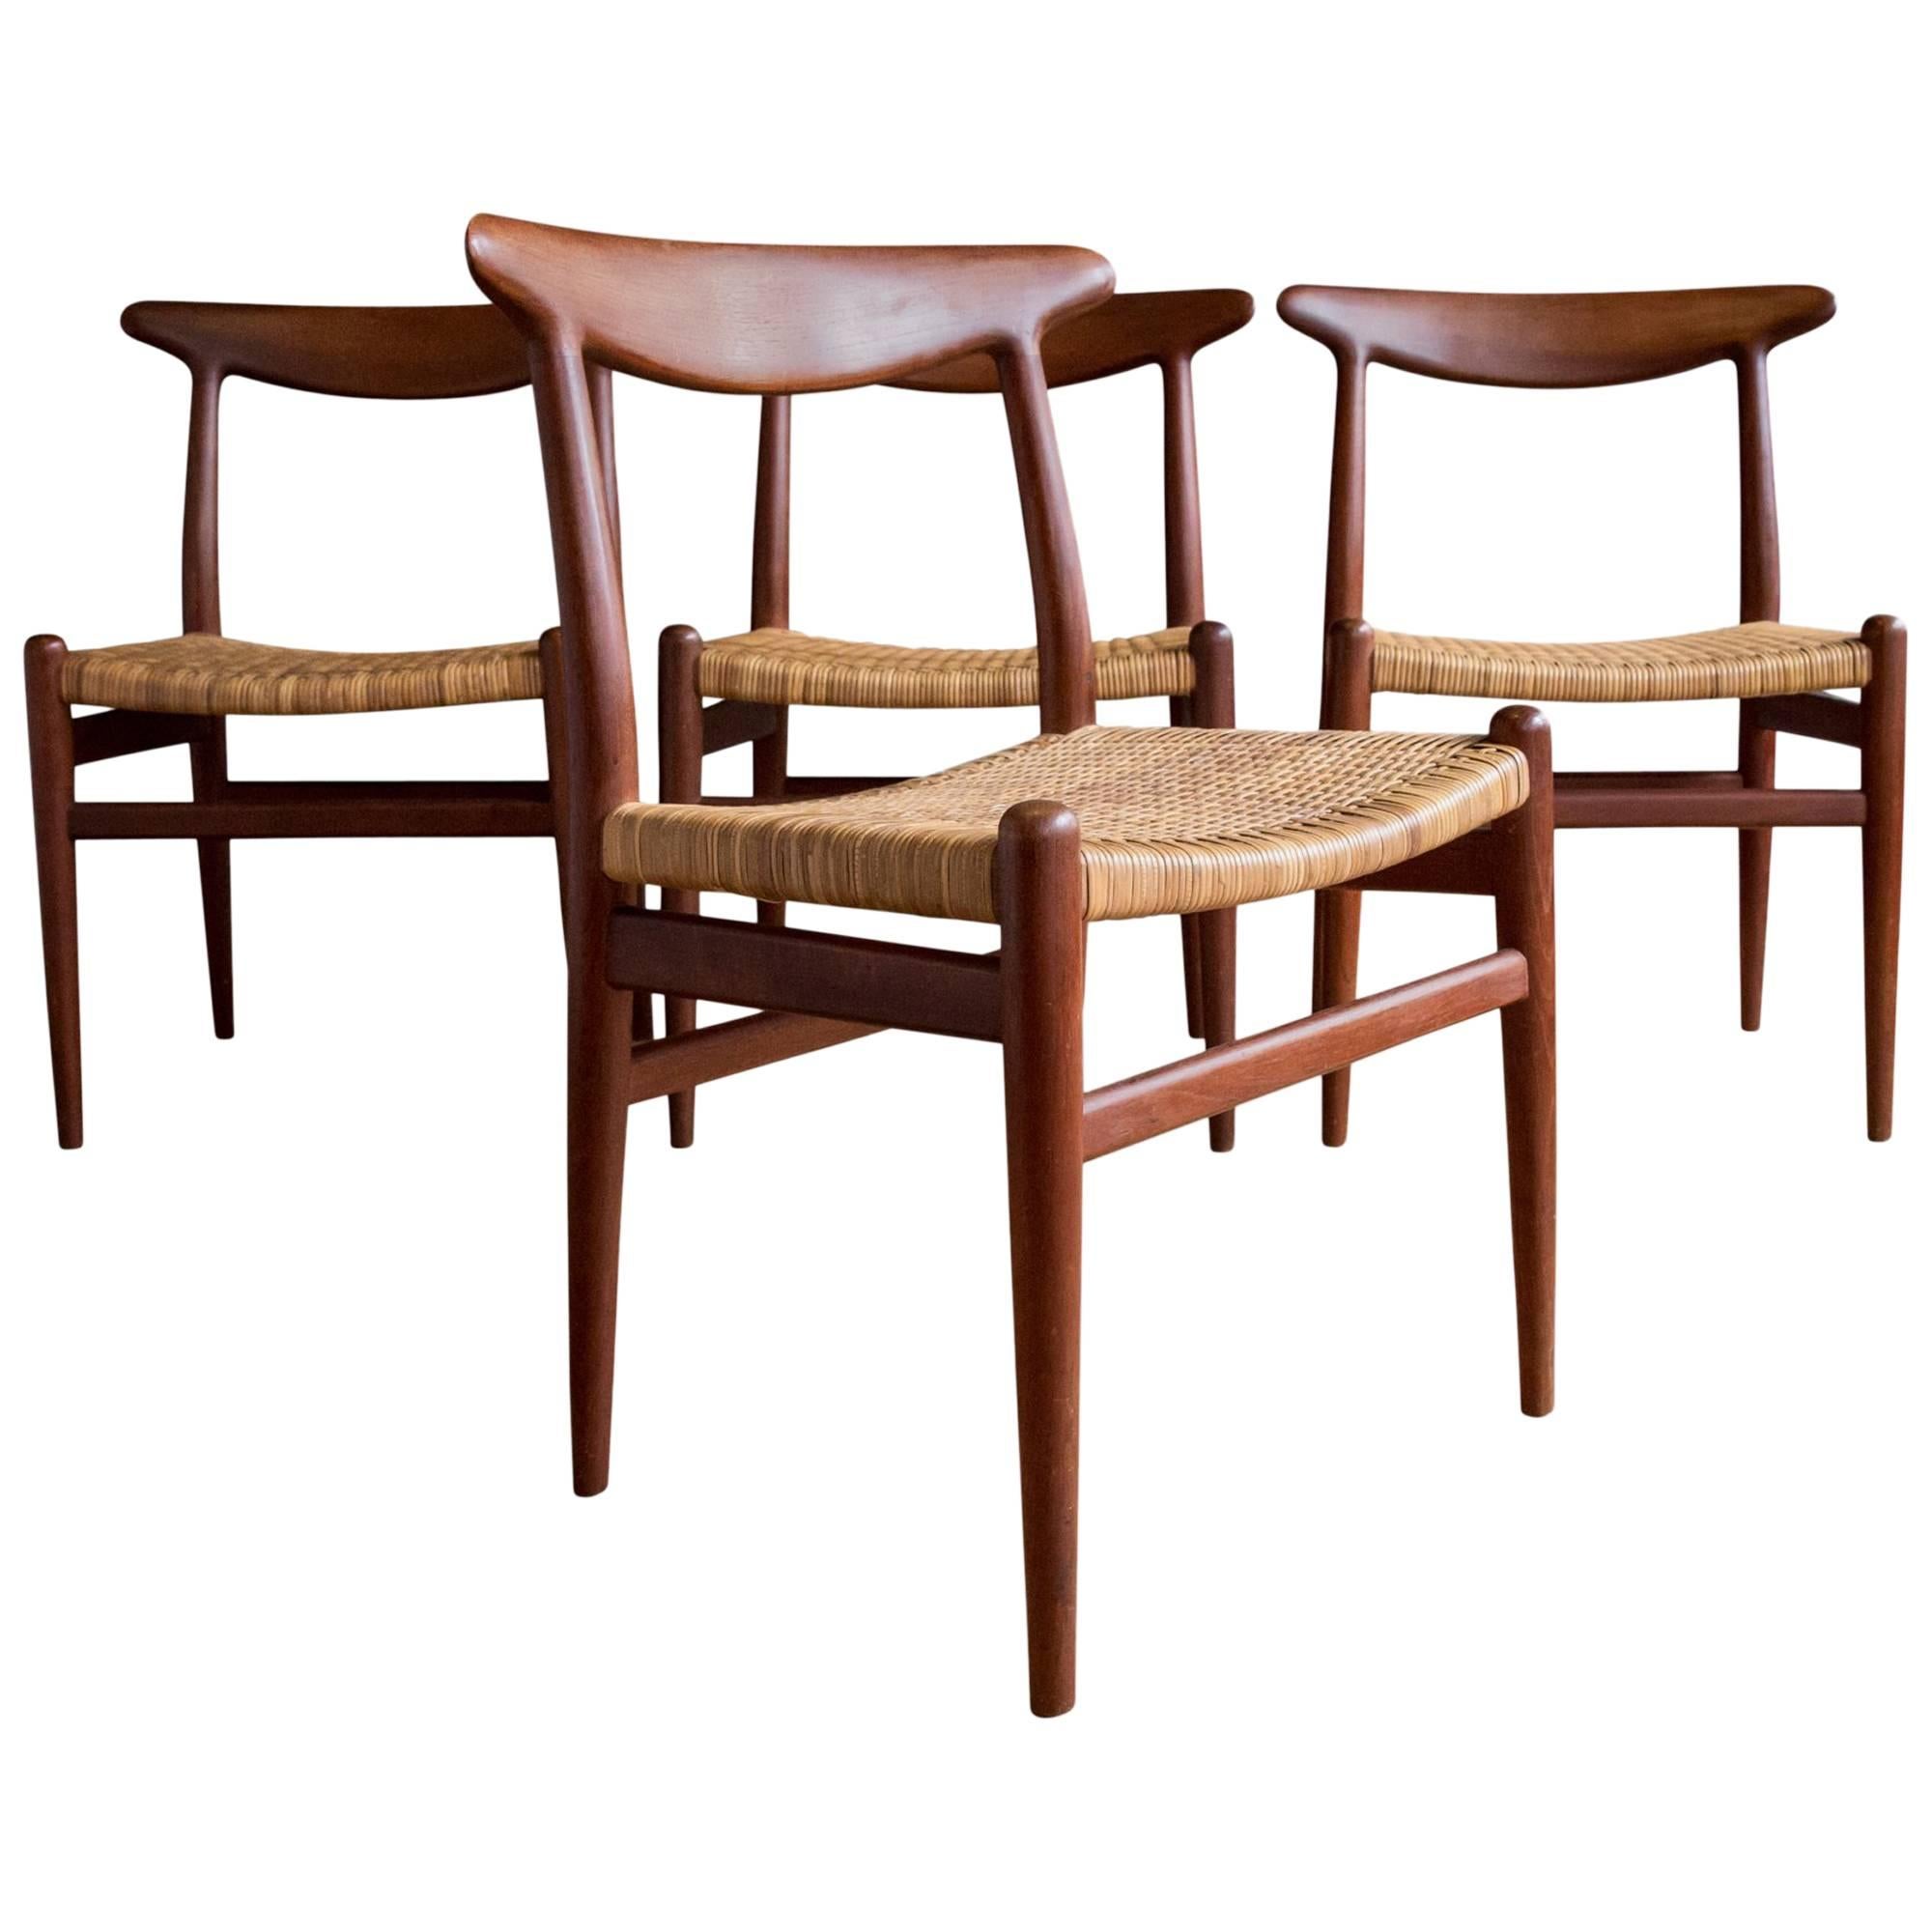 Set of Four Hans Wegner "W2" Teak and Cane Dining Chairs